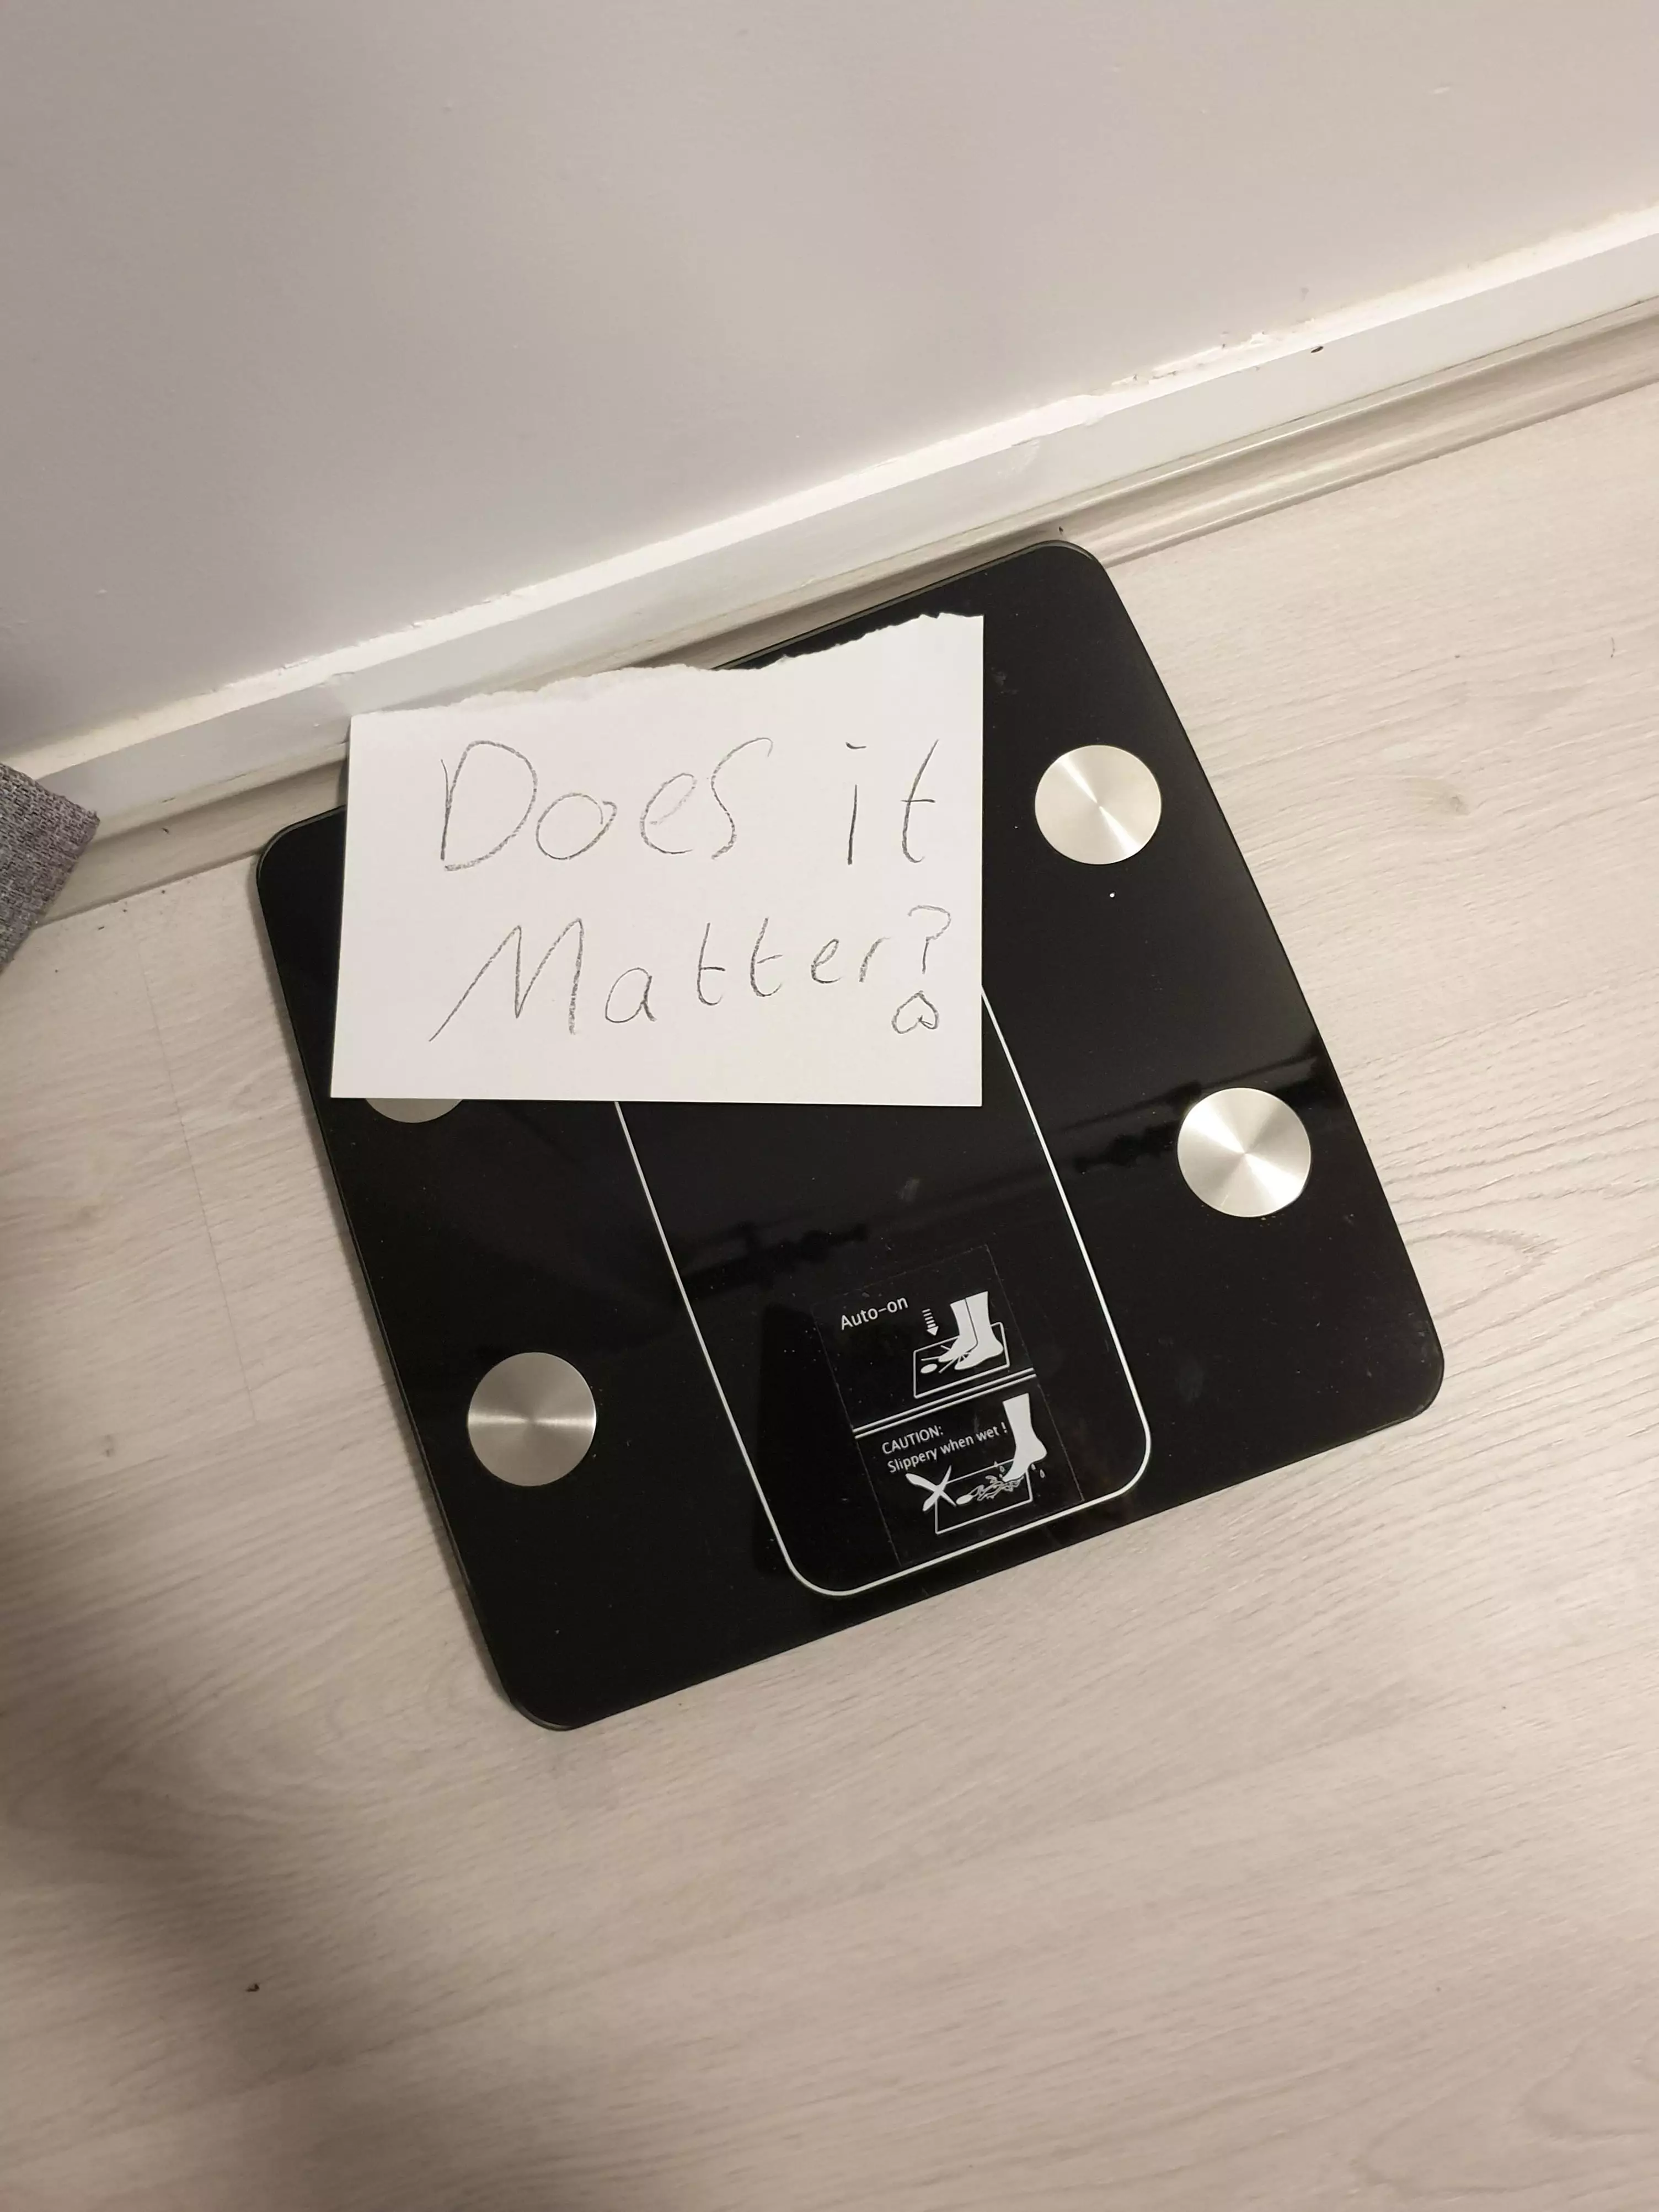 Kelly's 12-year-old son Jack left her a note on the scale.